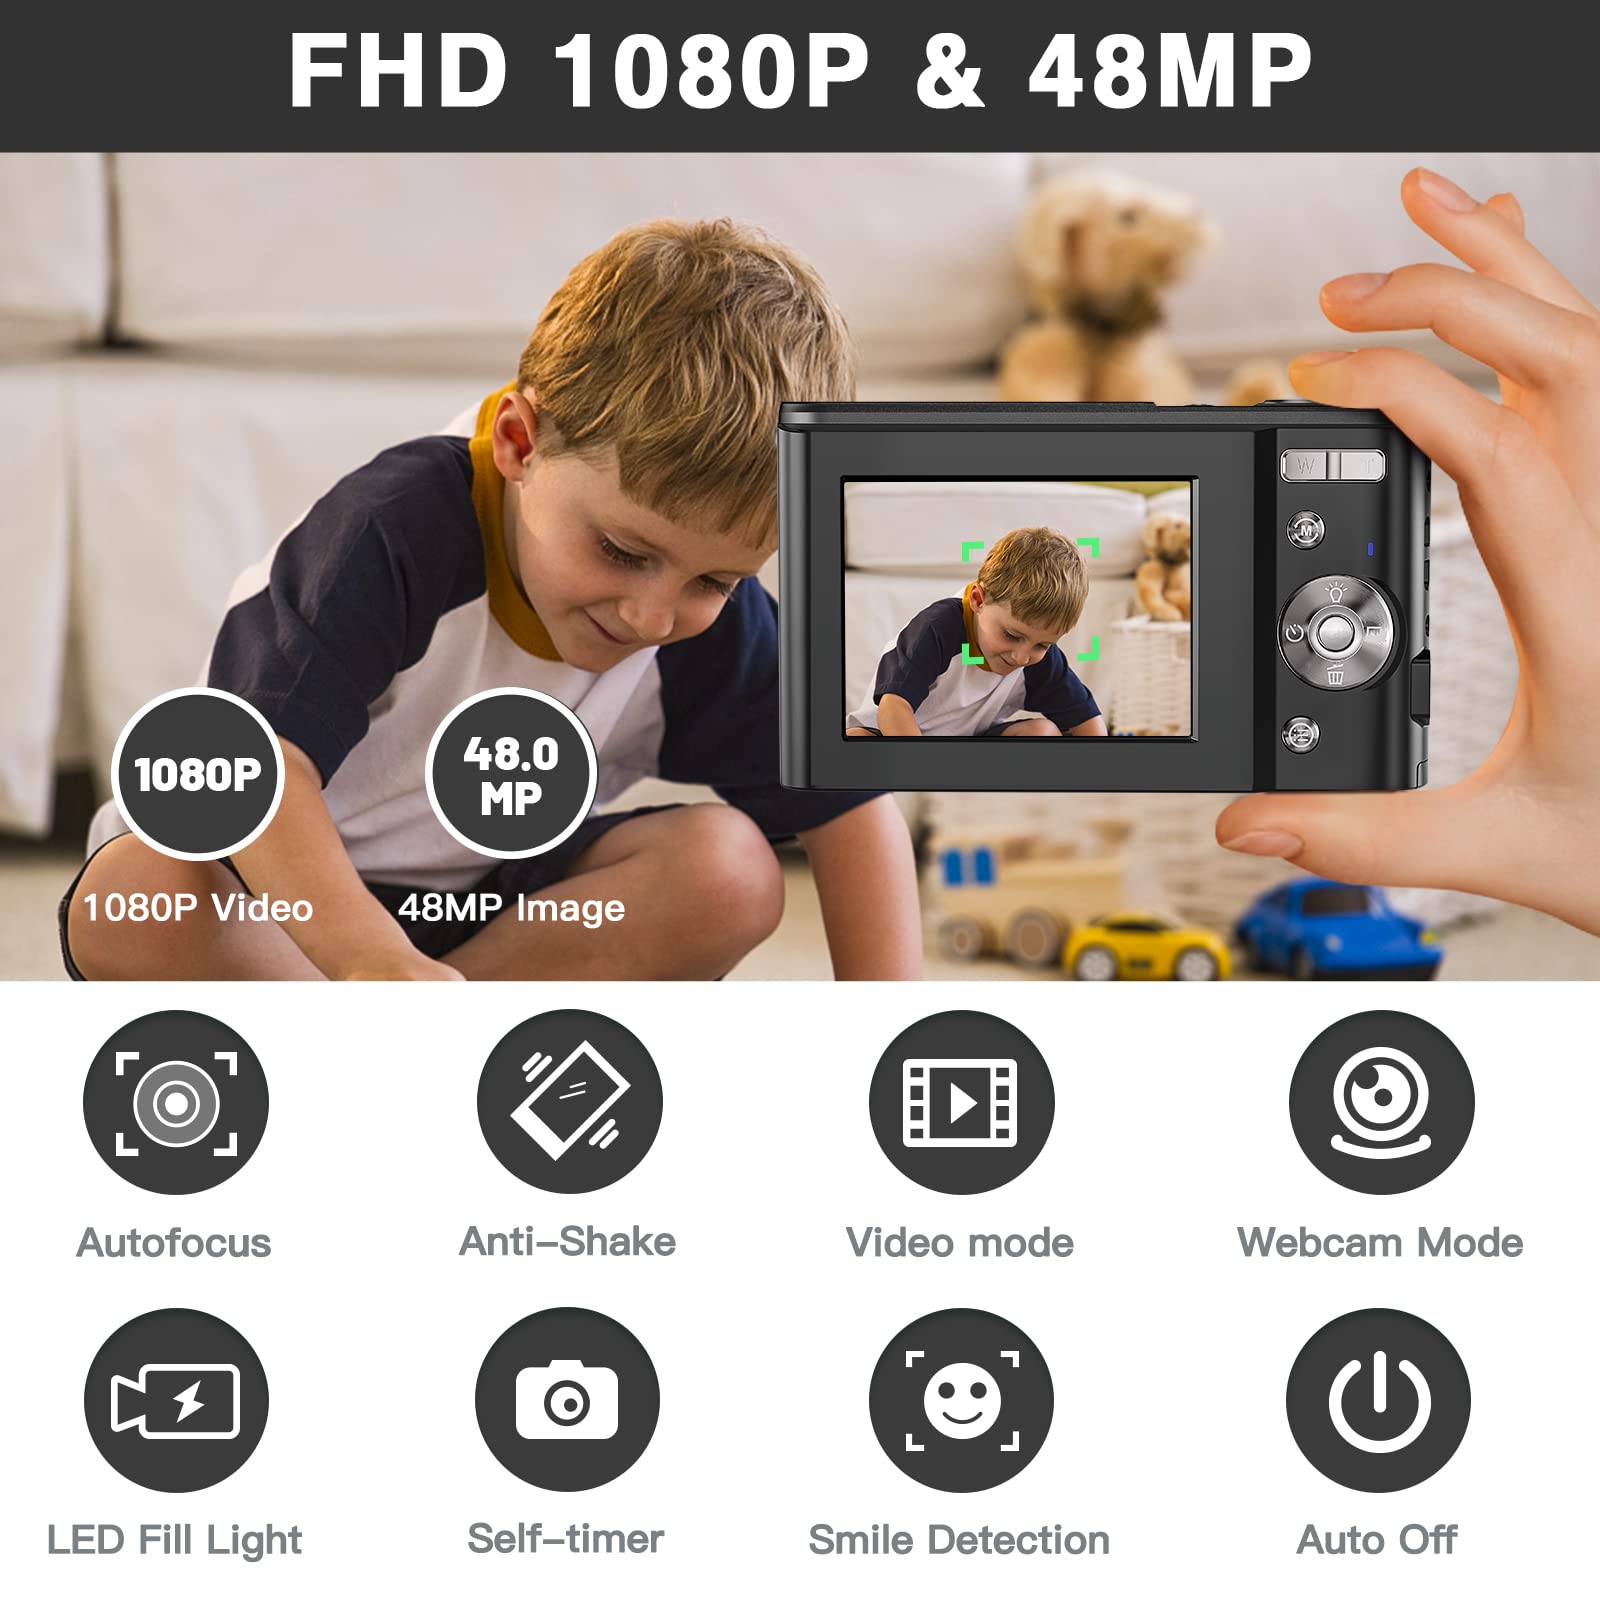 Sevenat Digital Camera Autofocus Vlogging Camera with 32G SD Card FHD 1080P 48MP 16X Digital Zoom Compact Easy to Use Portable Cameras for Photography for Kids Teenagers Adult Beginners Student Black